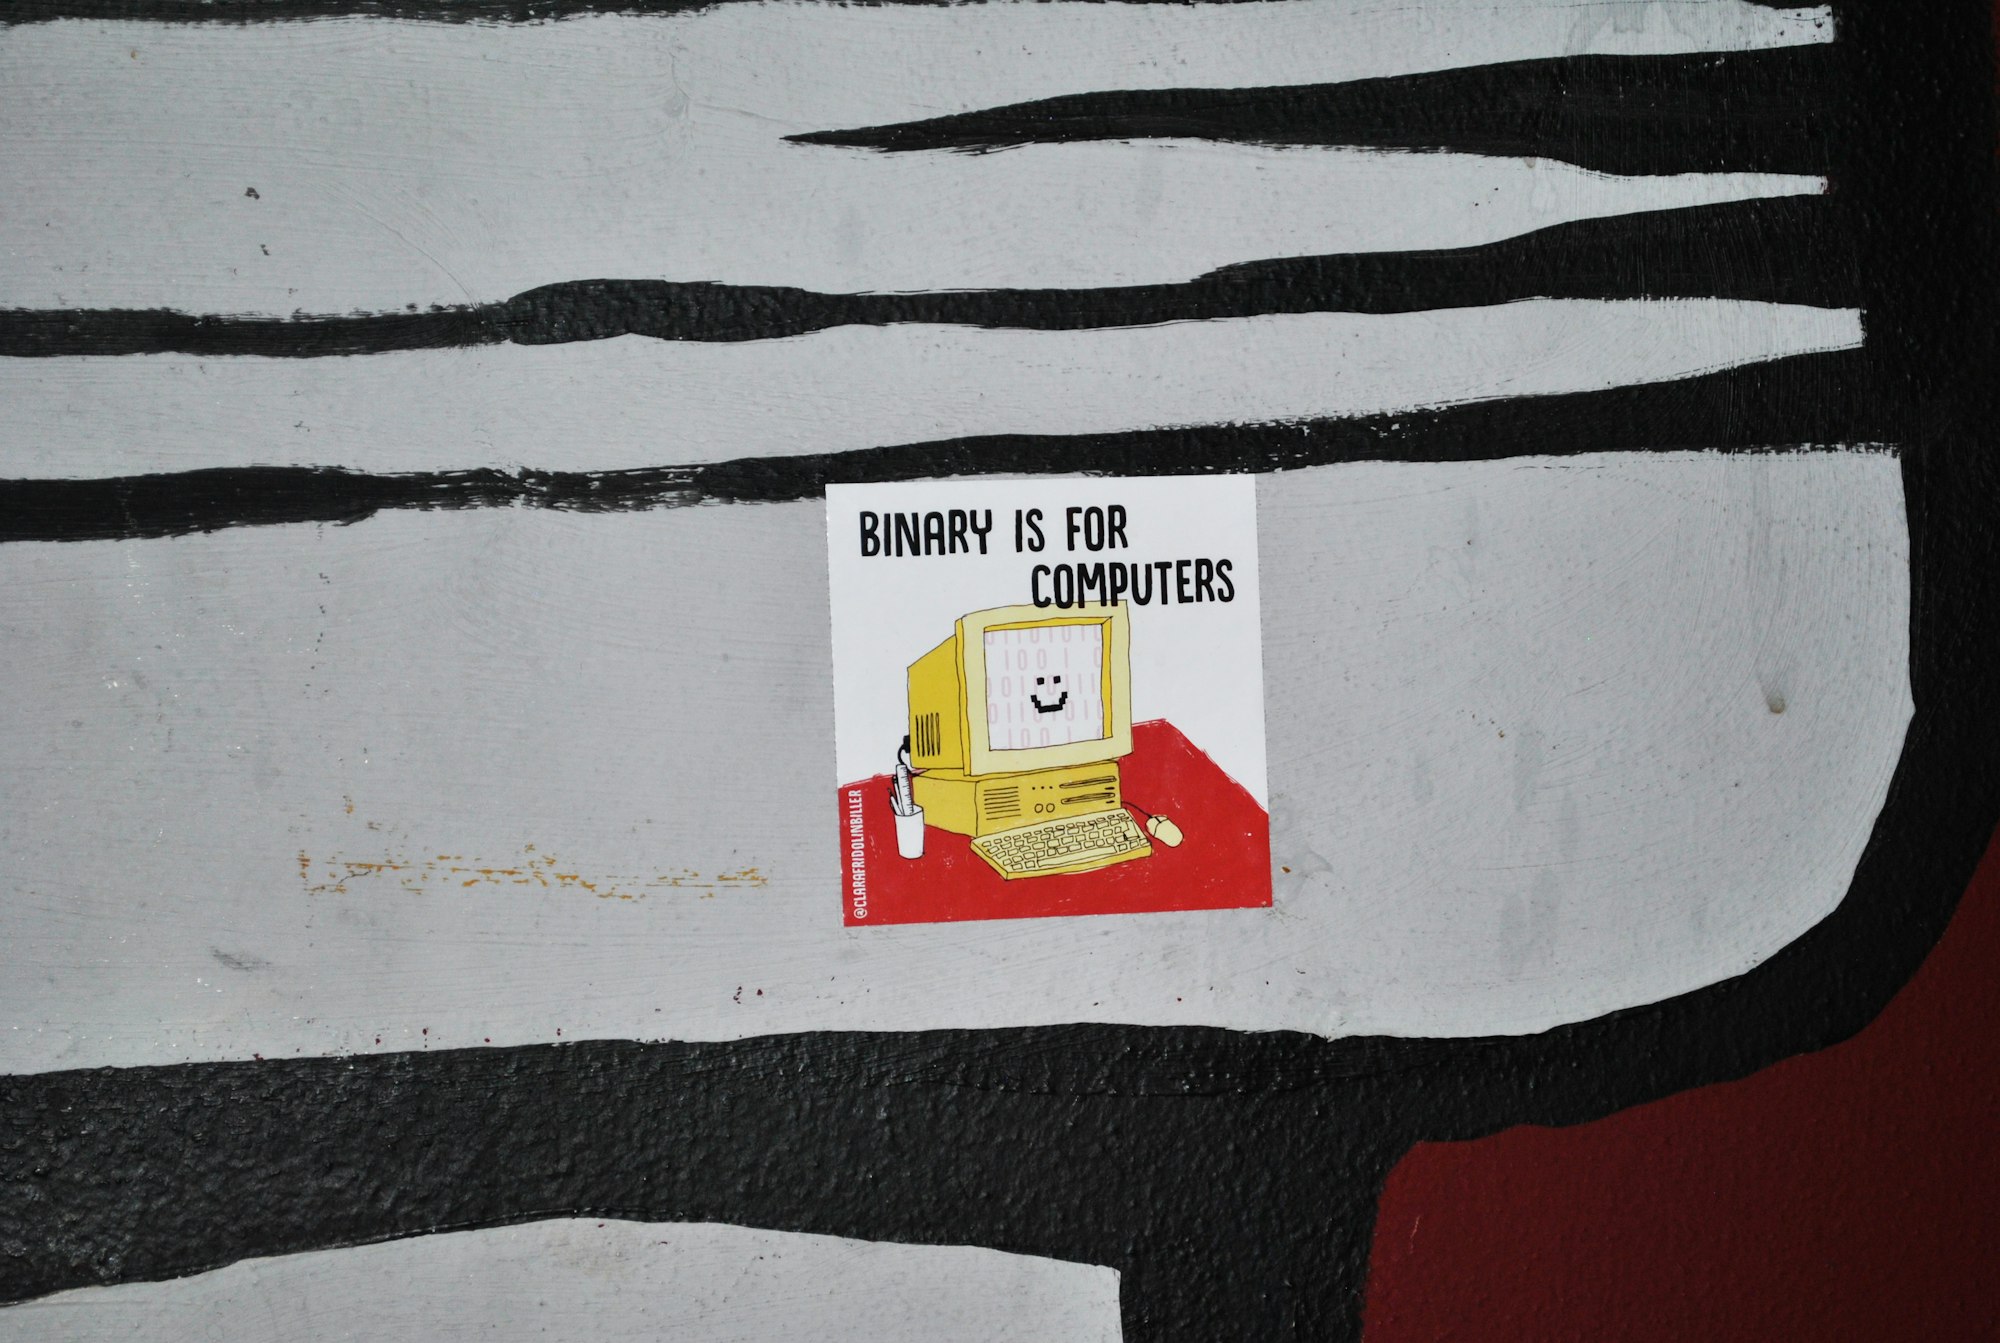 Binary is for computers sticker at a bar in Lugano, Switzerland.